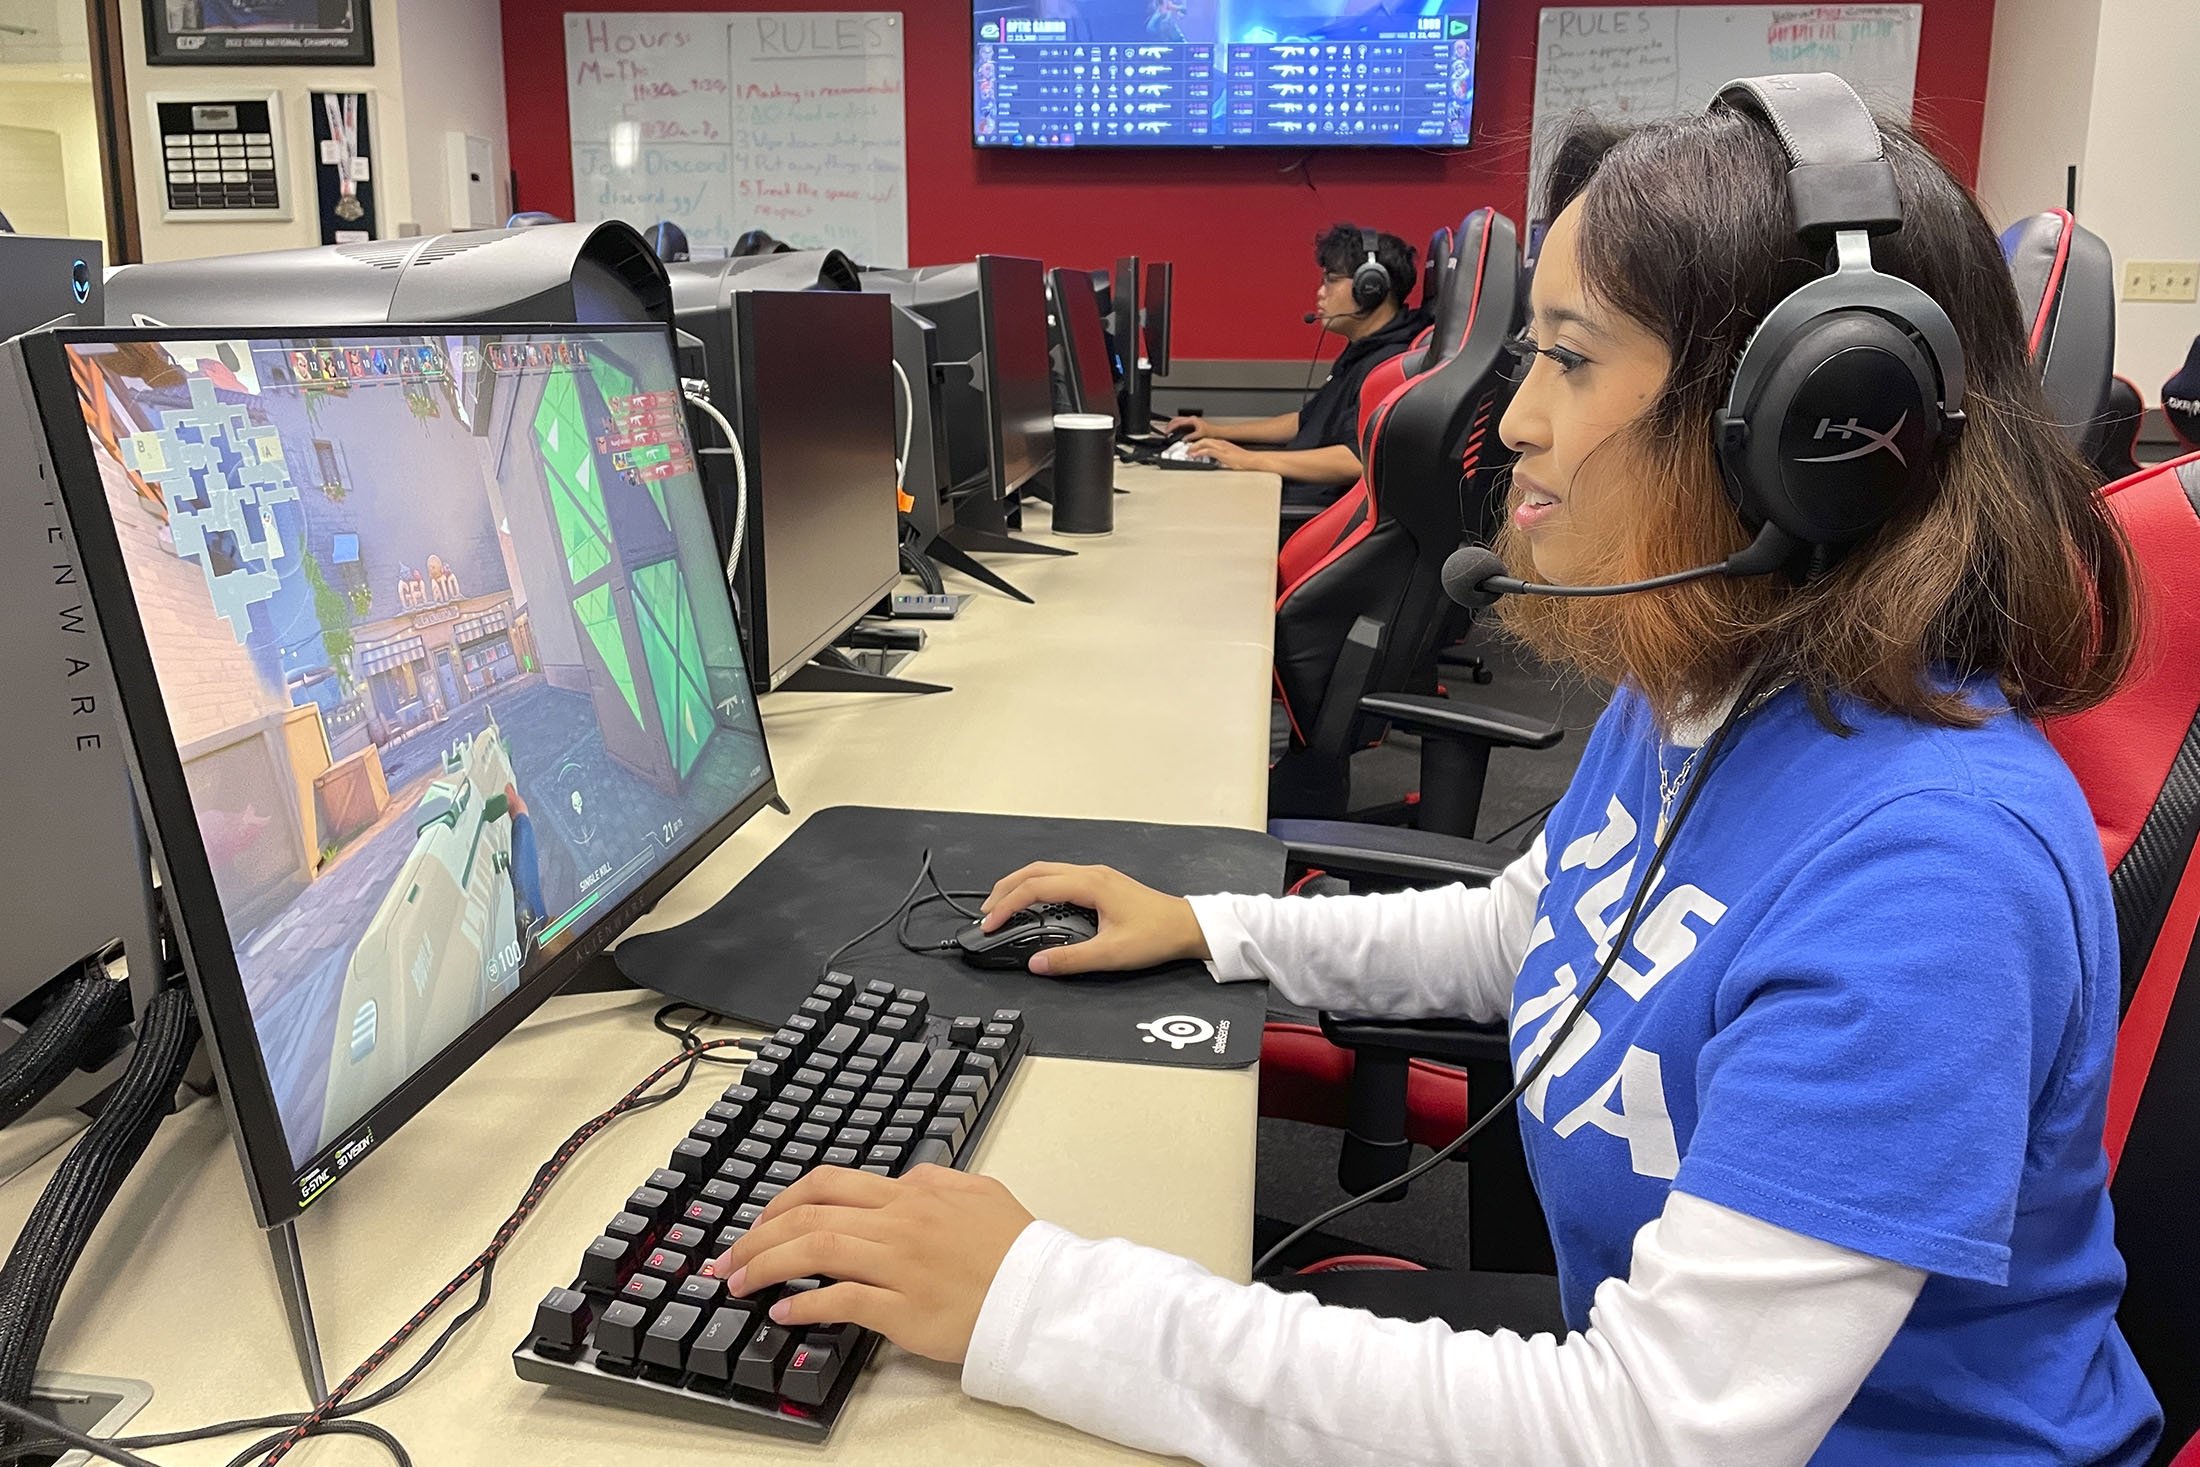 New job opportunities for young aspirants in the online gaming